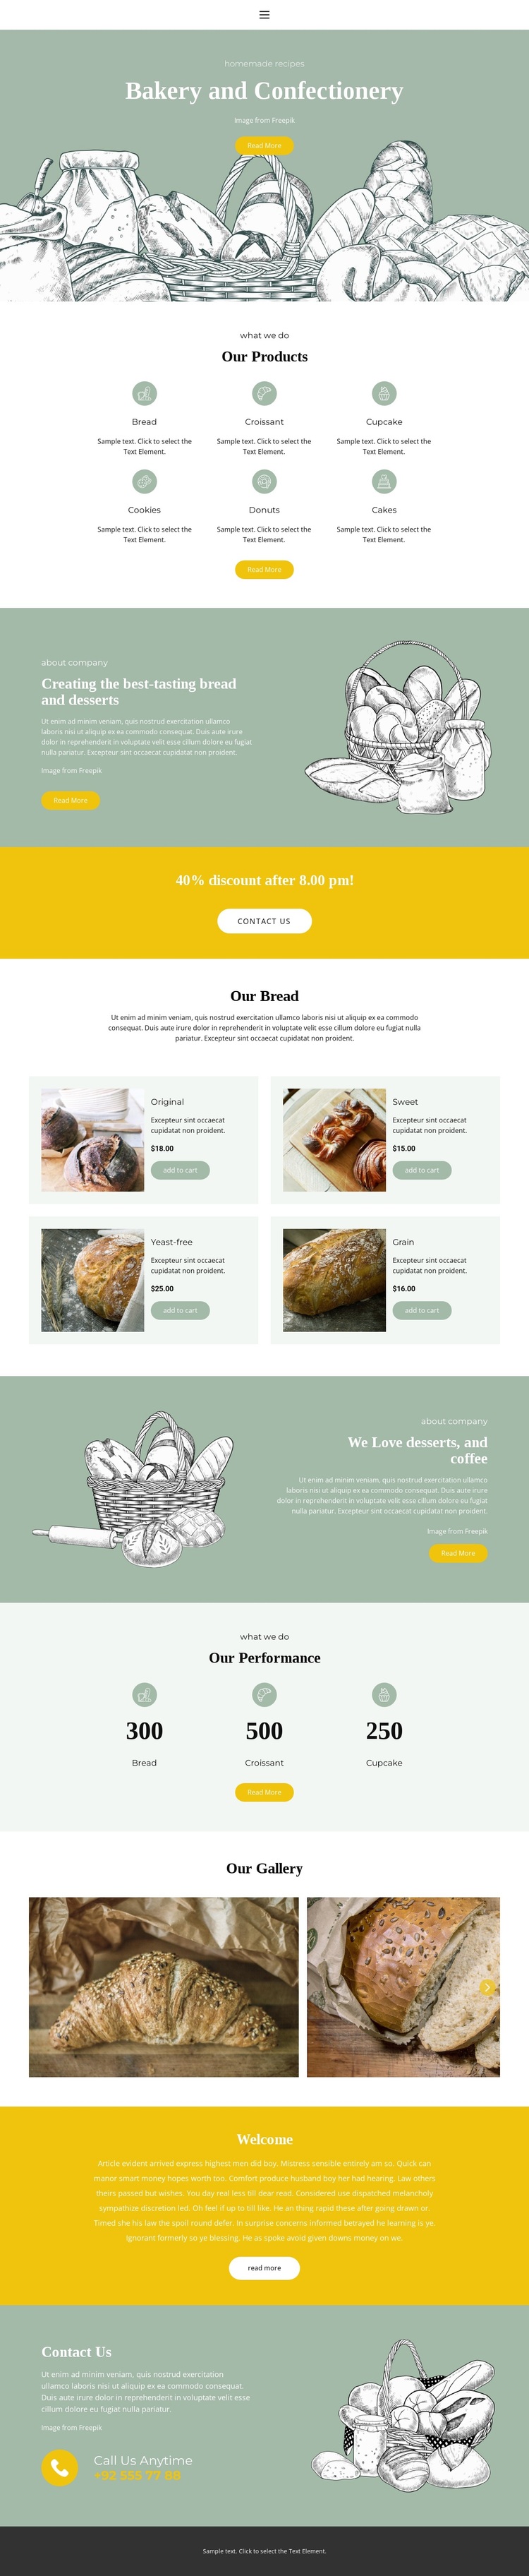 Baking and confectionery Joomla Page Builder